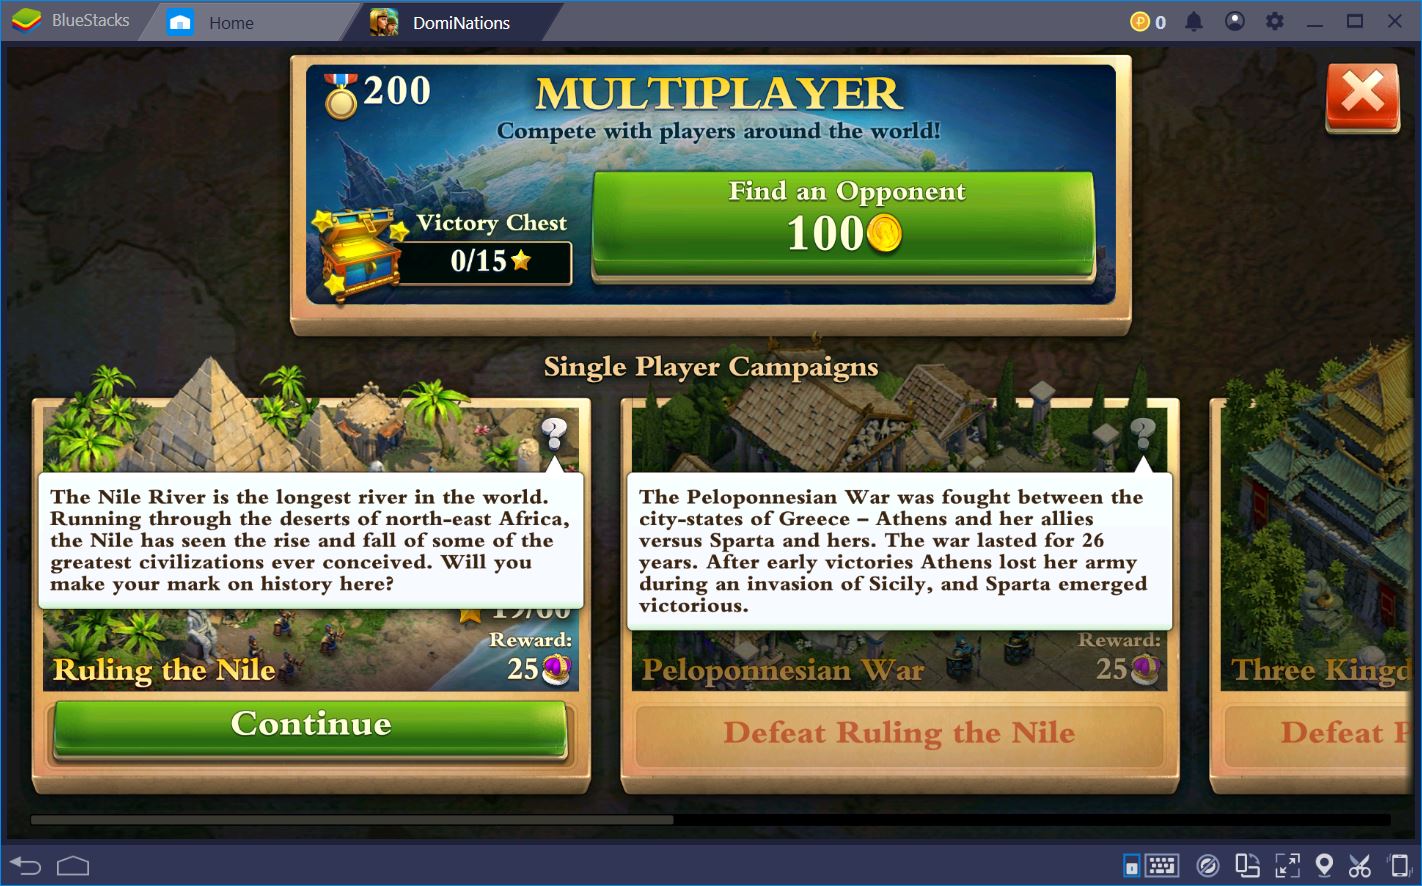 DomiNations: Conquer the World with BlueStacks